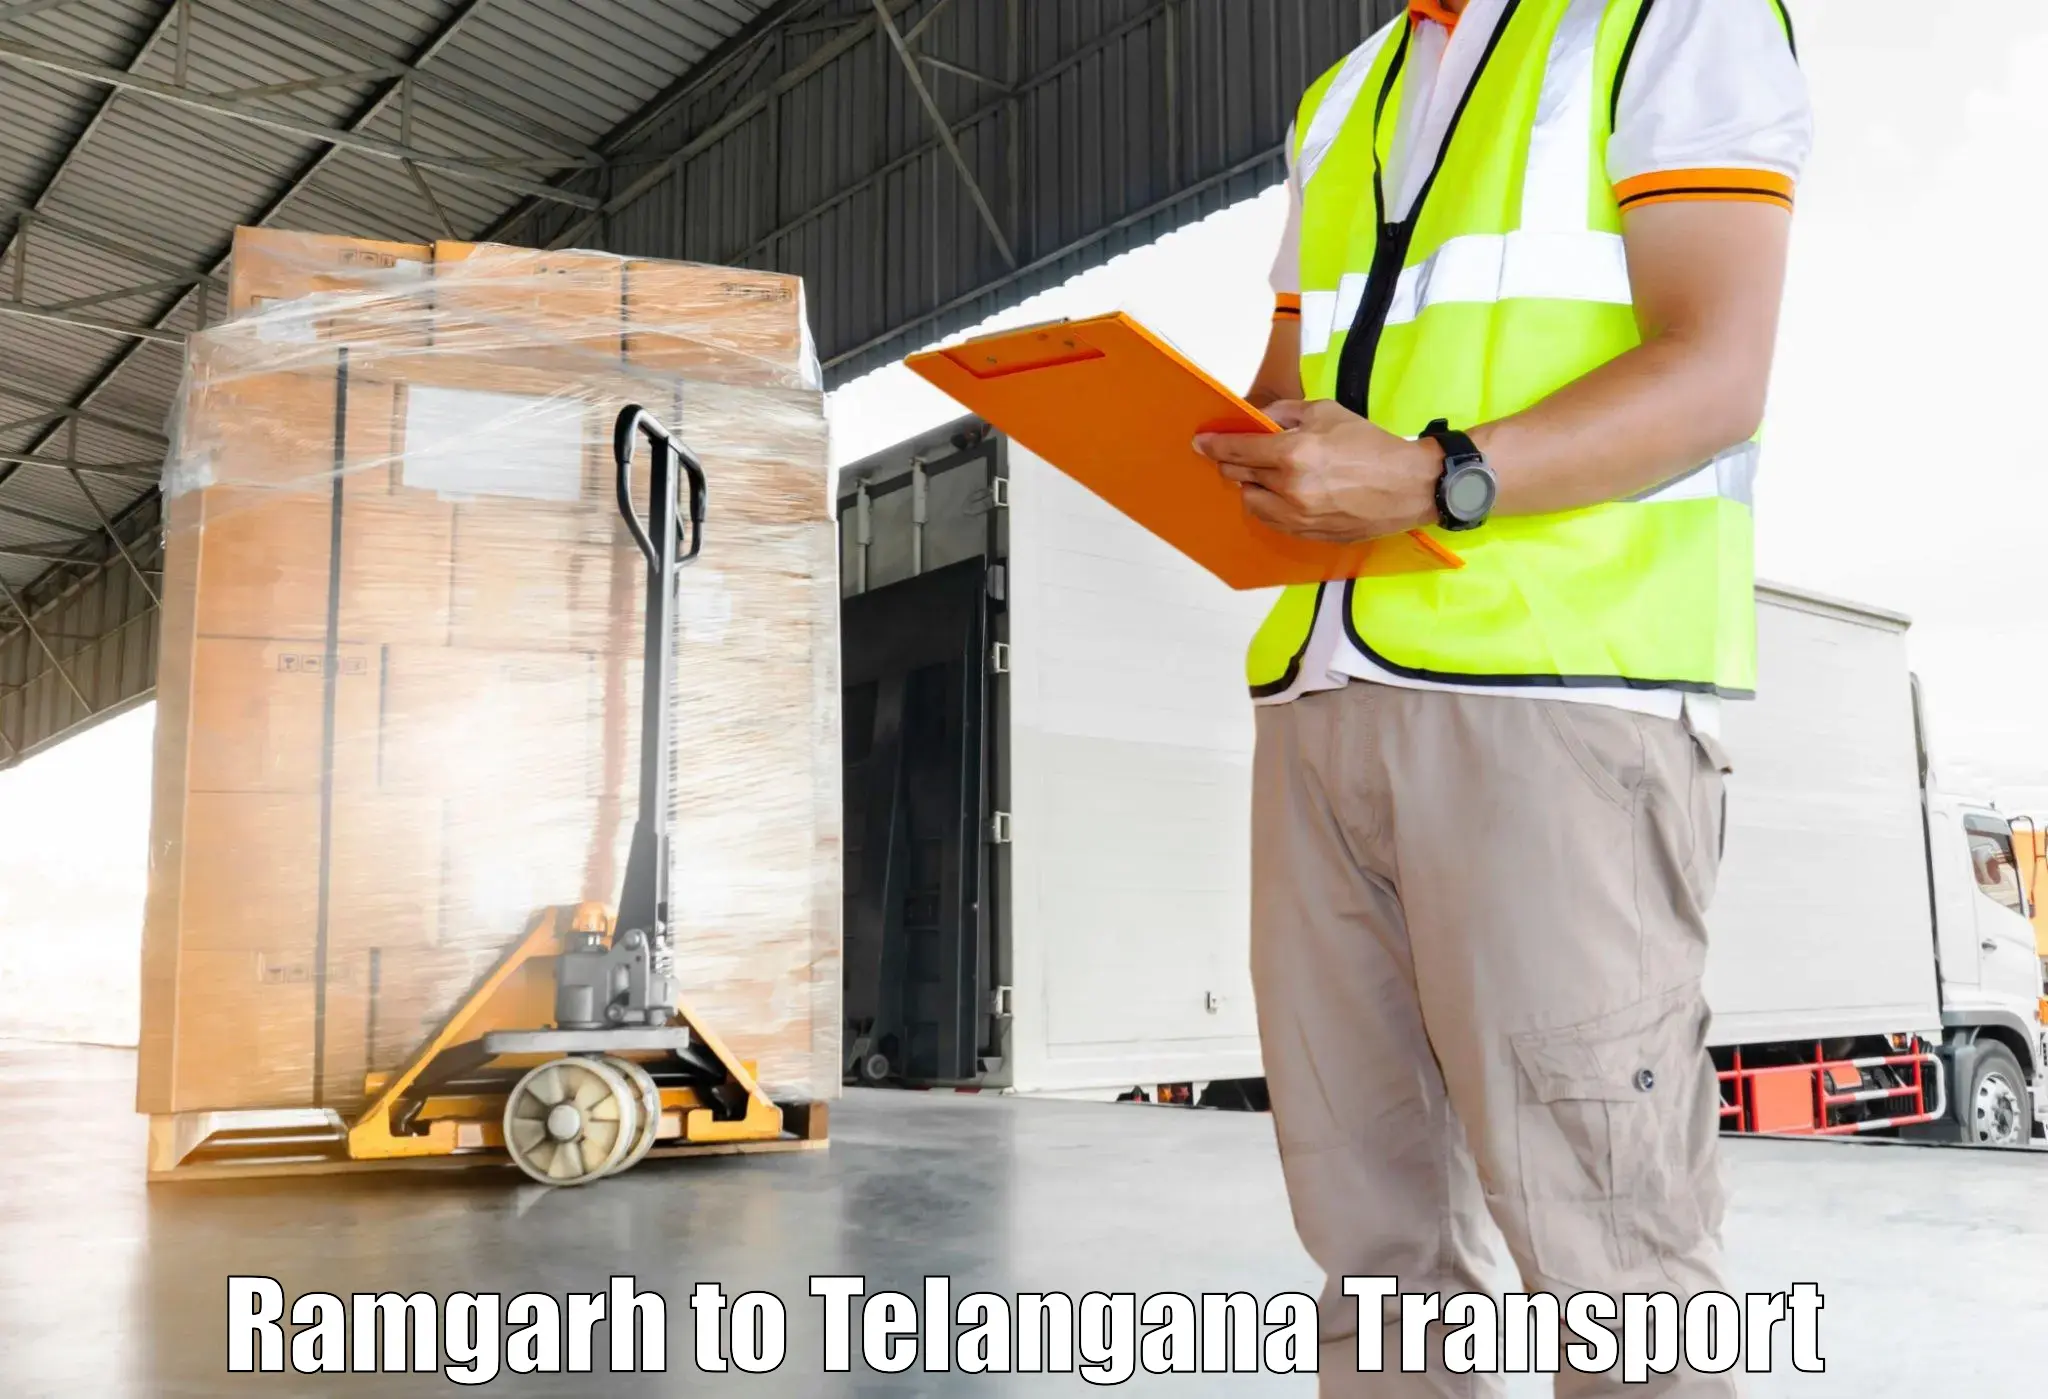 Air freight transport services Ramgarh to Boath Buzurg